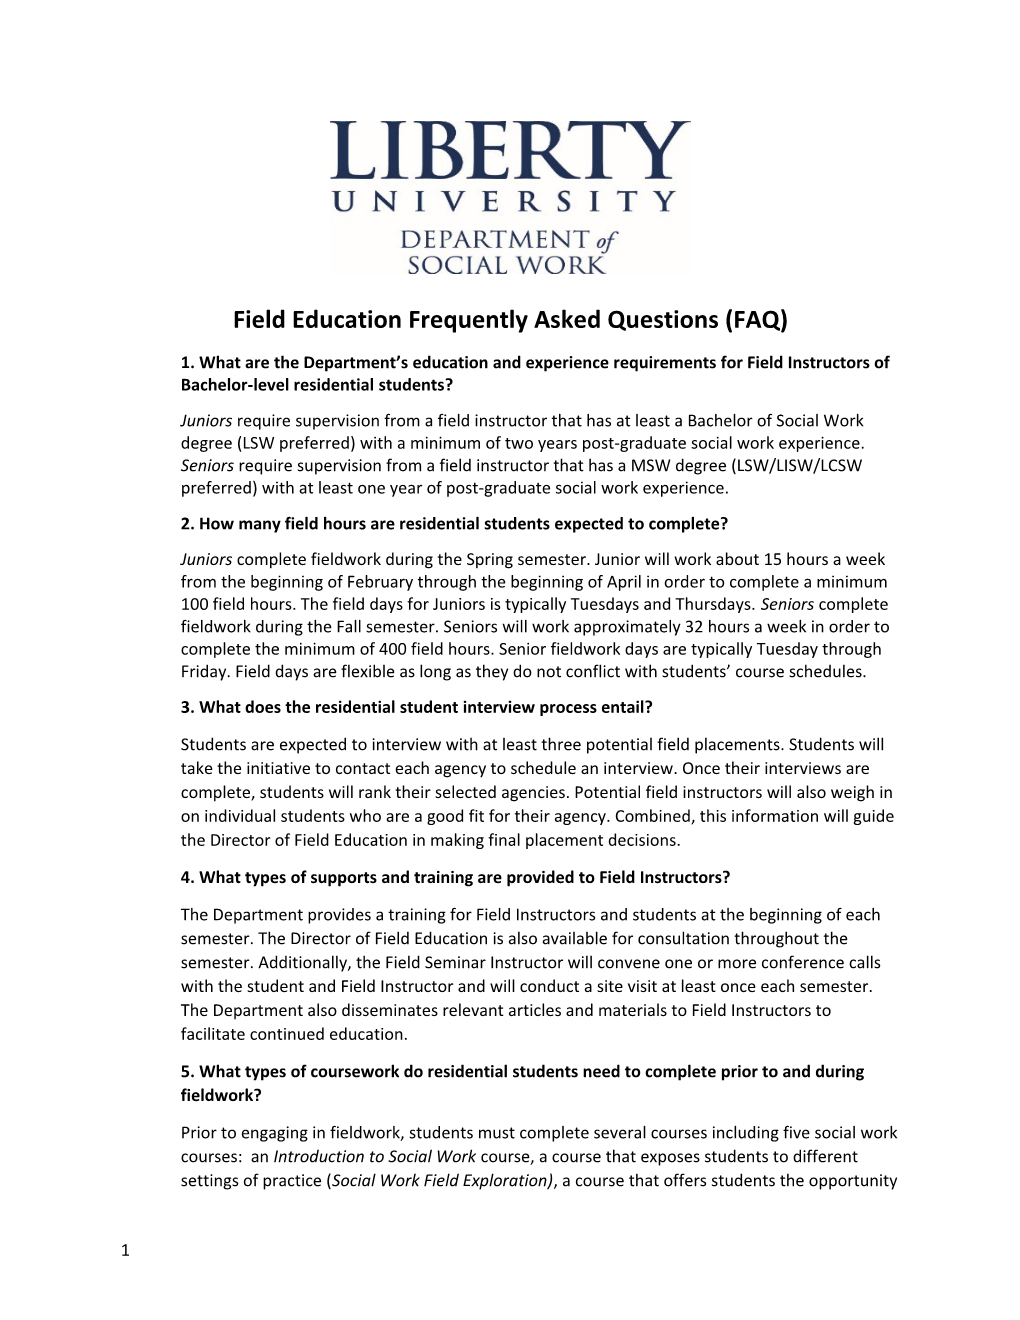 Field Education Frequently Asked Questions (FAQ)